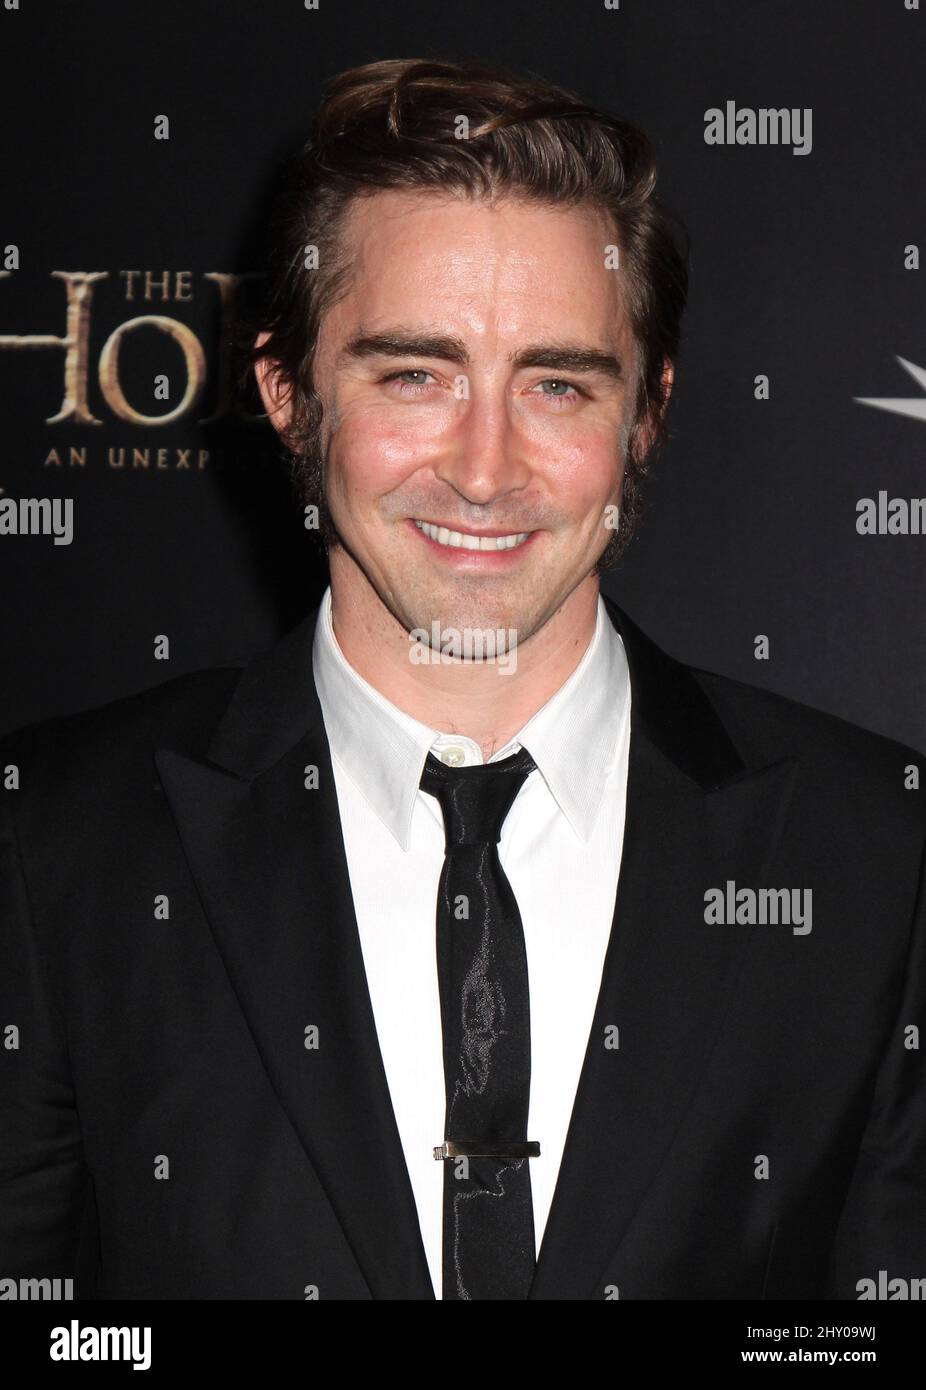 Lee Pace attending 